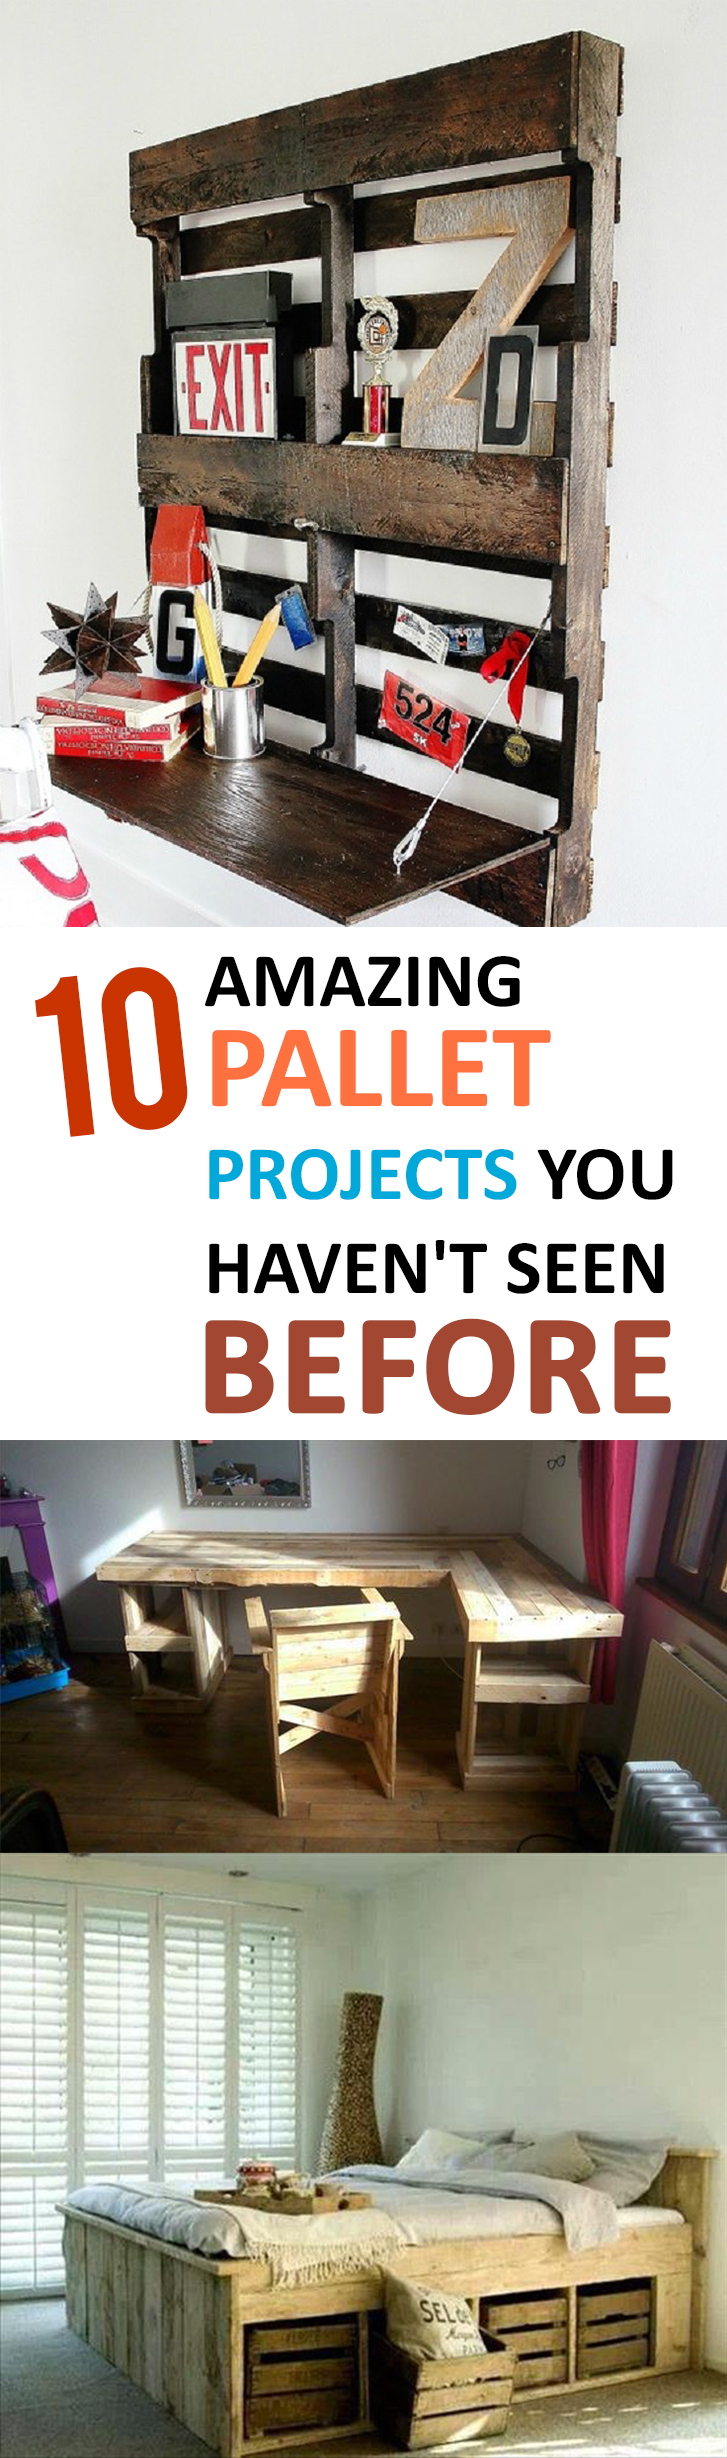 10 Amazing Pallet Projects You Haven't Seen Before